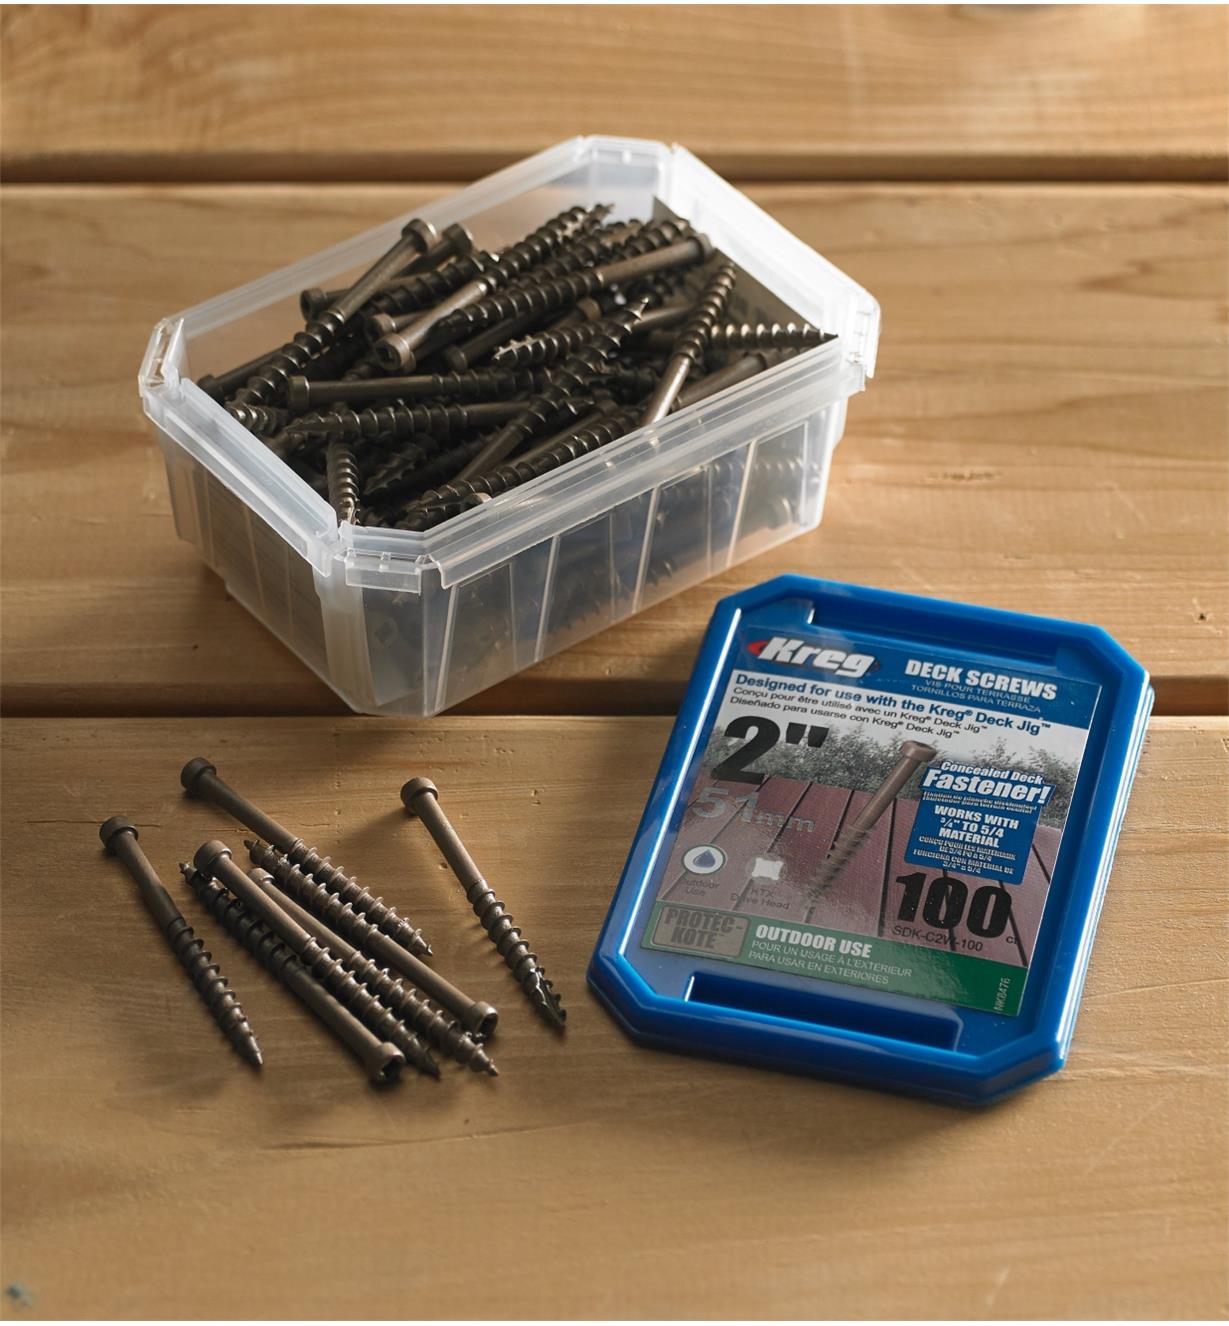 Open box of Kreg screws with several screws removed and displayed on a deck  